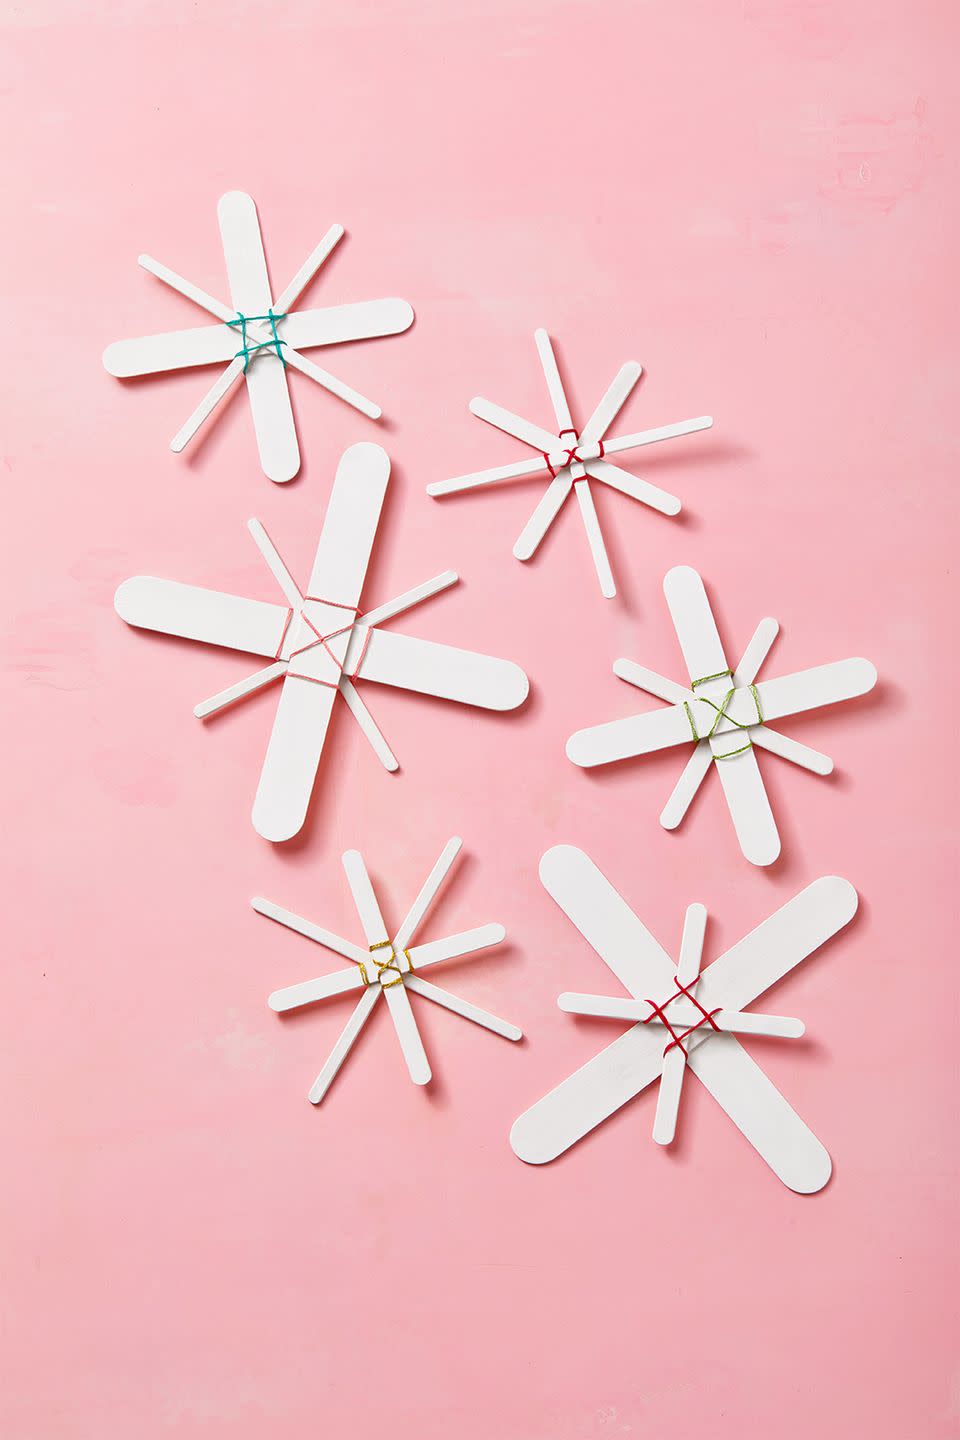 <p>Inspired by traditional Scandinavian straw ornaments, these popsicle stick ornaments are the perfect weekend activity. To make, paint popsicle sticks white and let dry. Arrange matching sizes into an X-shape and glue together in the middle. Arrange 2 X’s diagonally on top of each other to create a snowflake shape and glue in the middle. Let dry completely. Weave colored embroidery thread around the popsicle sticks to create an X or grid pattern. Tie the thread at the back of the snowflake and trim any excess. Glue a ribbon loop to the back of the snowflake to hang.</p>